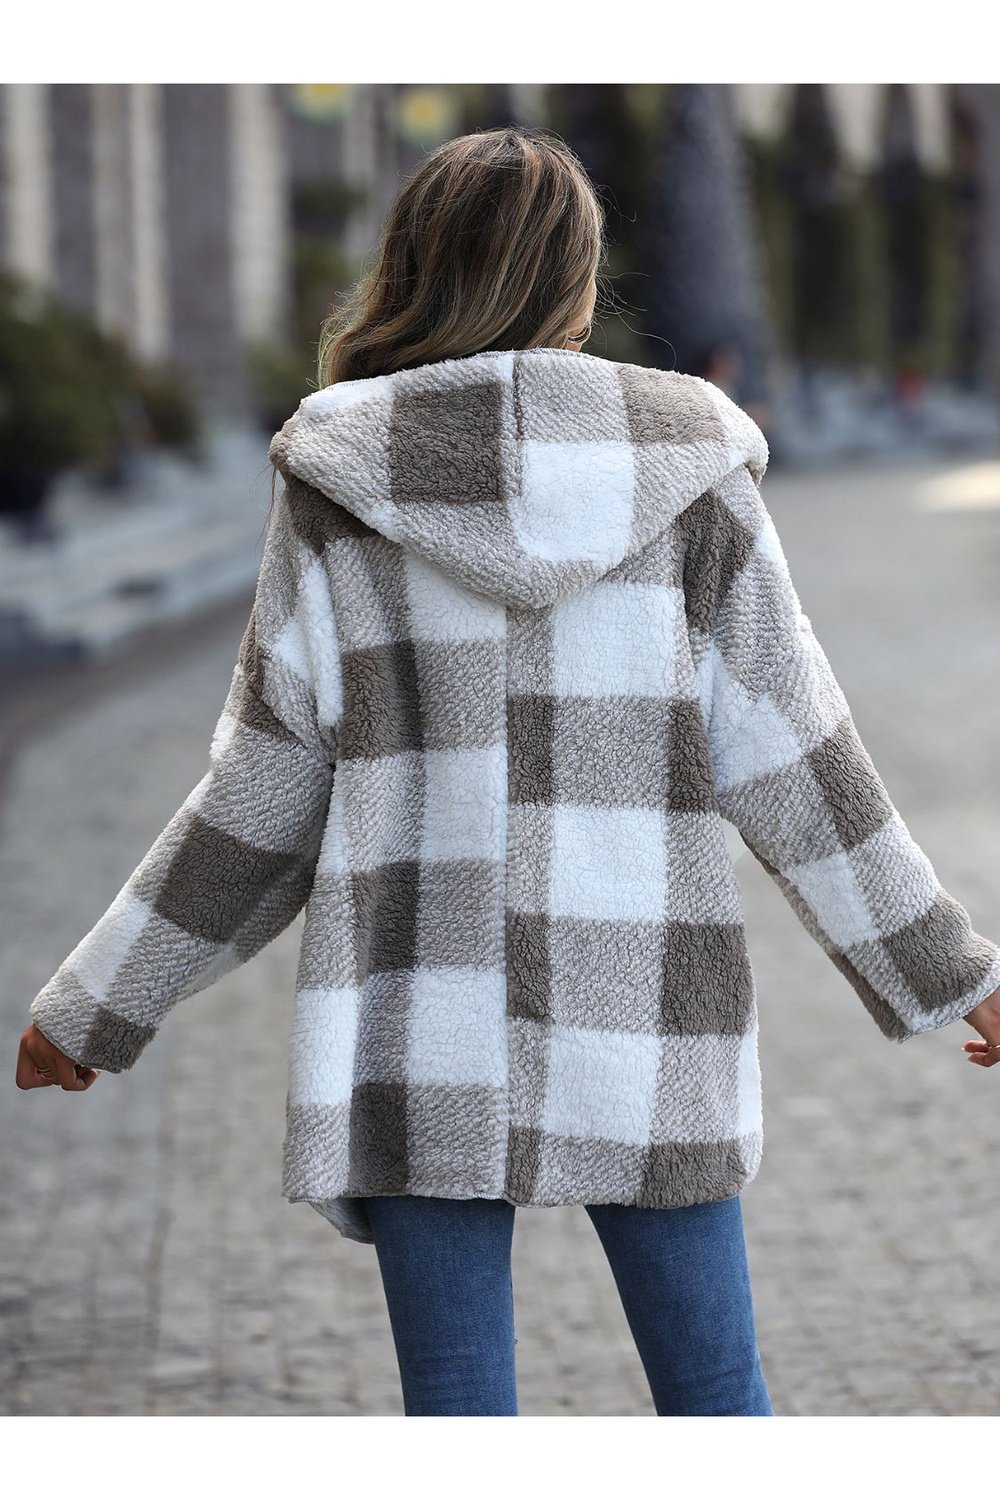 Plaid Open Front Hooded Coat - Jackets - FITGGINS